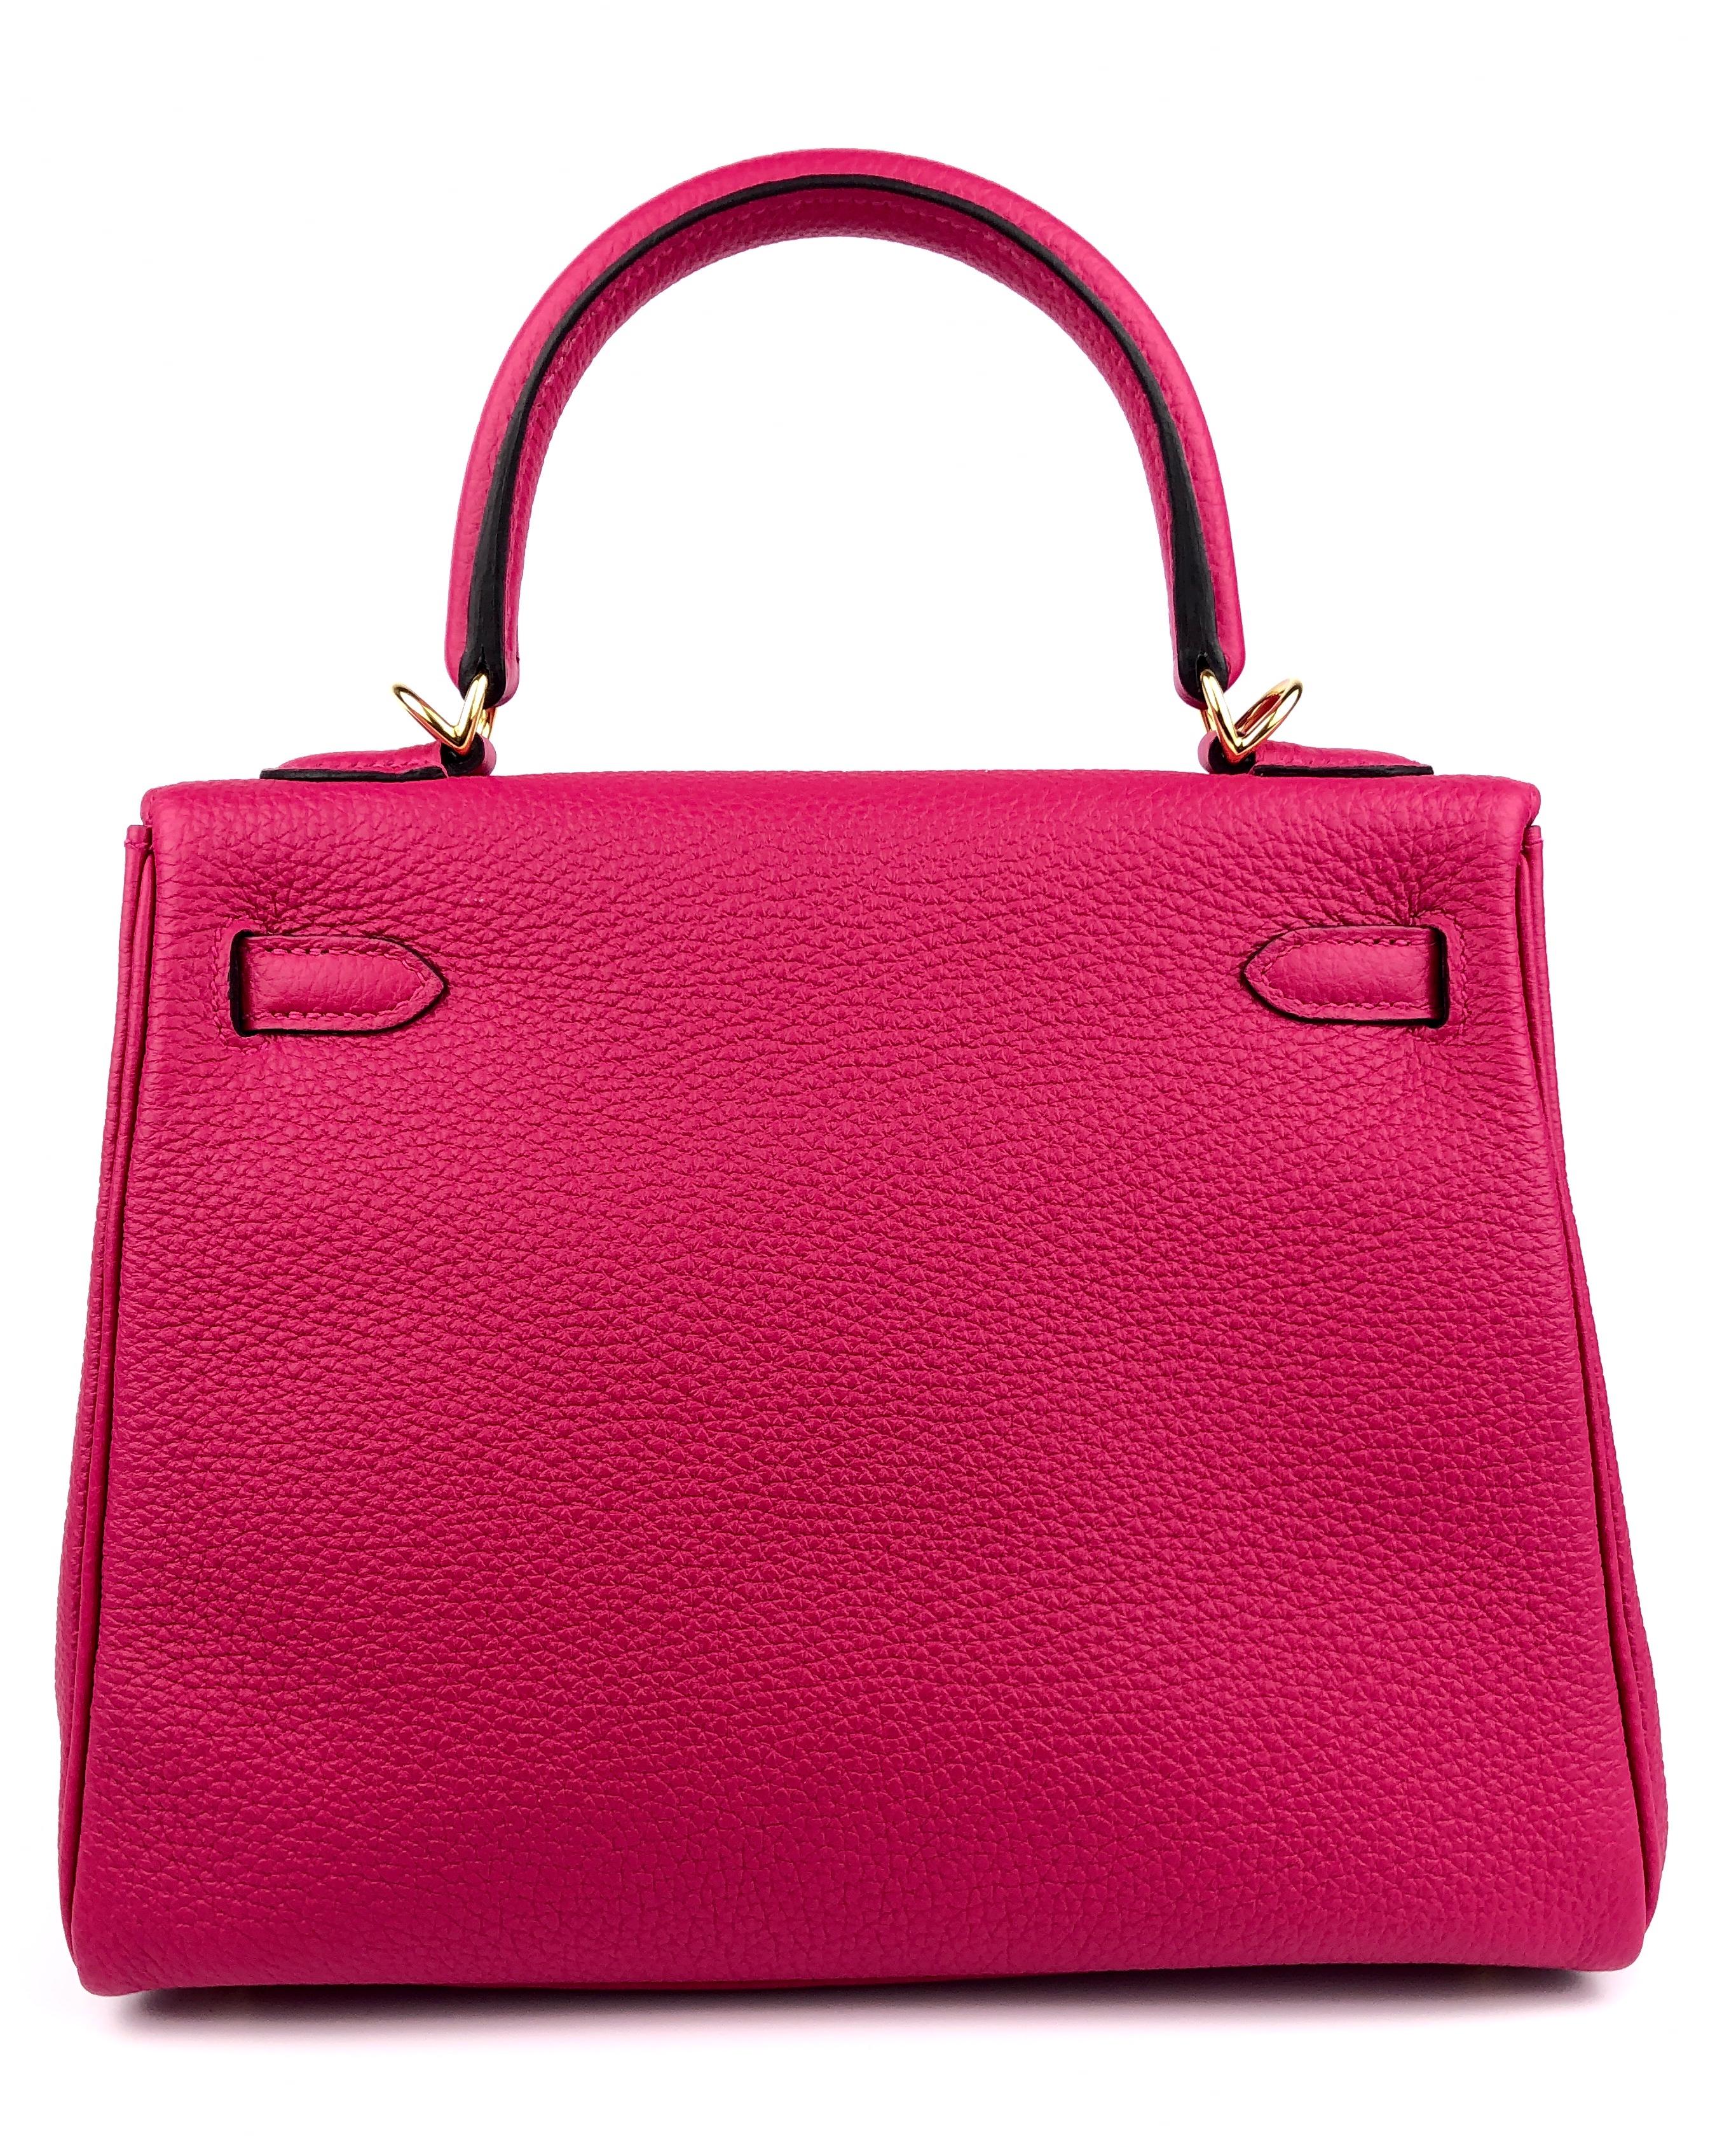 Hermes Kelly 25 Framboise Pink Togo Leather Gold Hardware NEW  For Sale 1